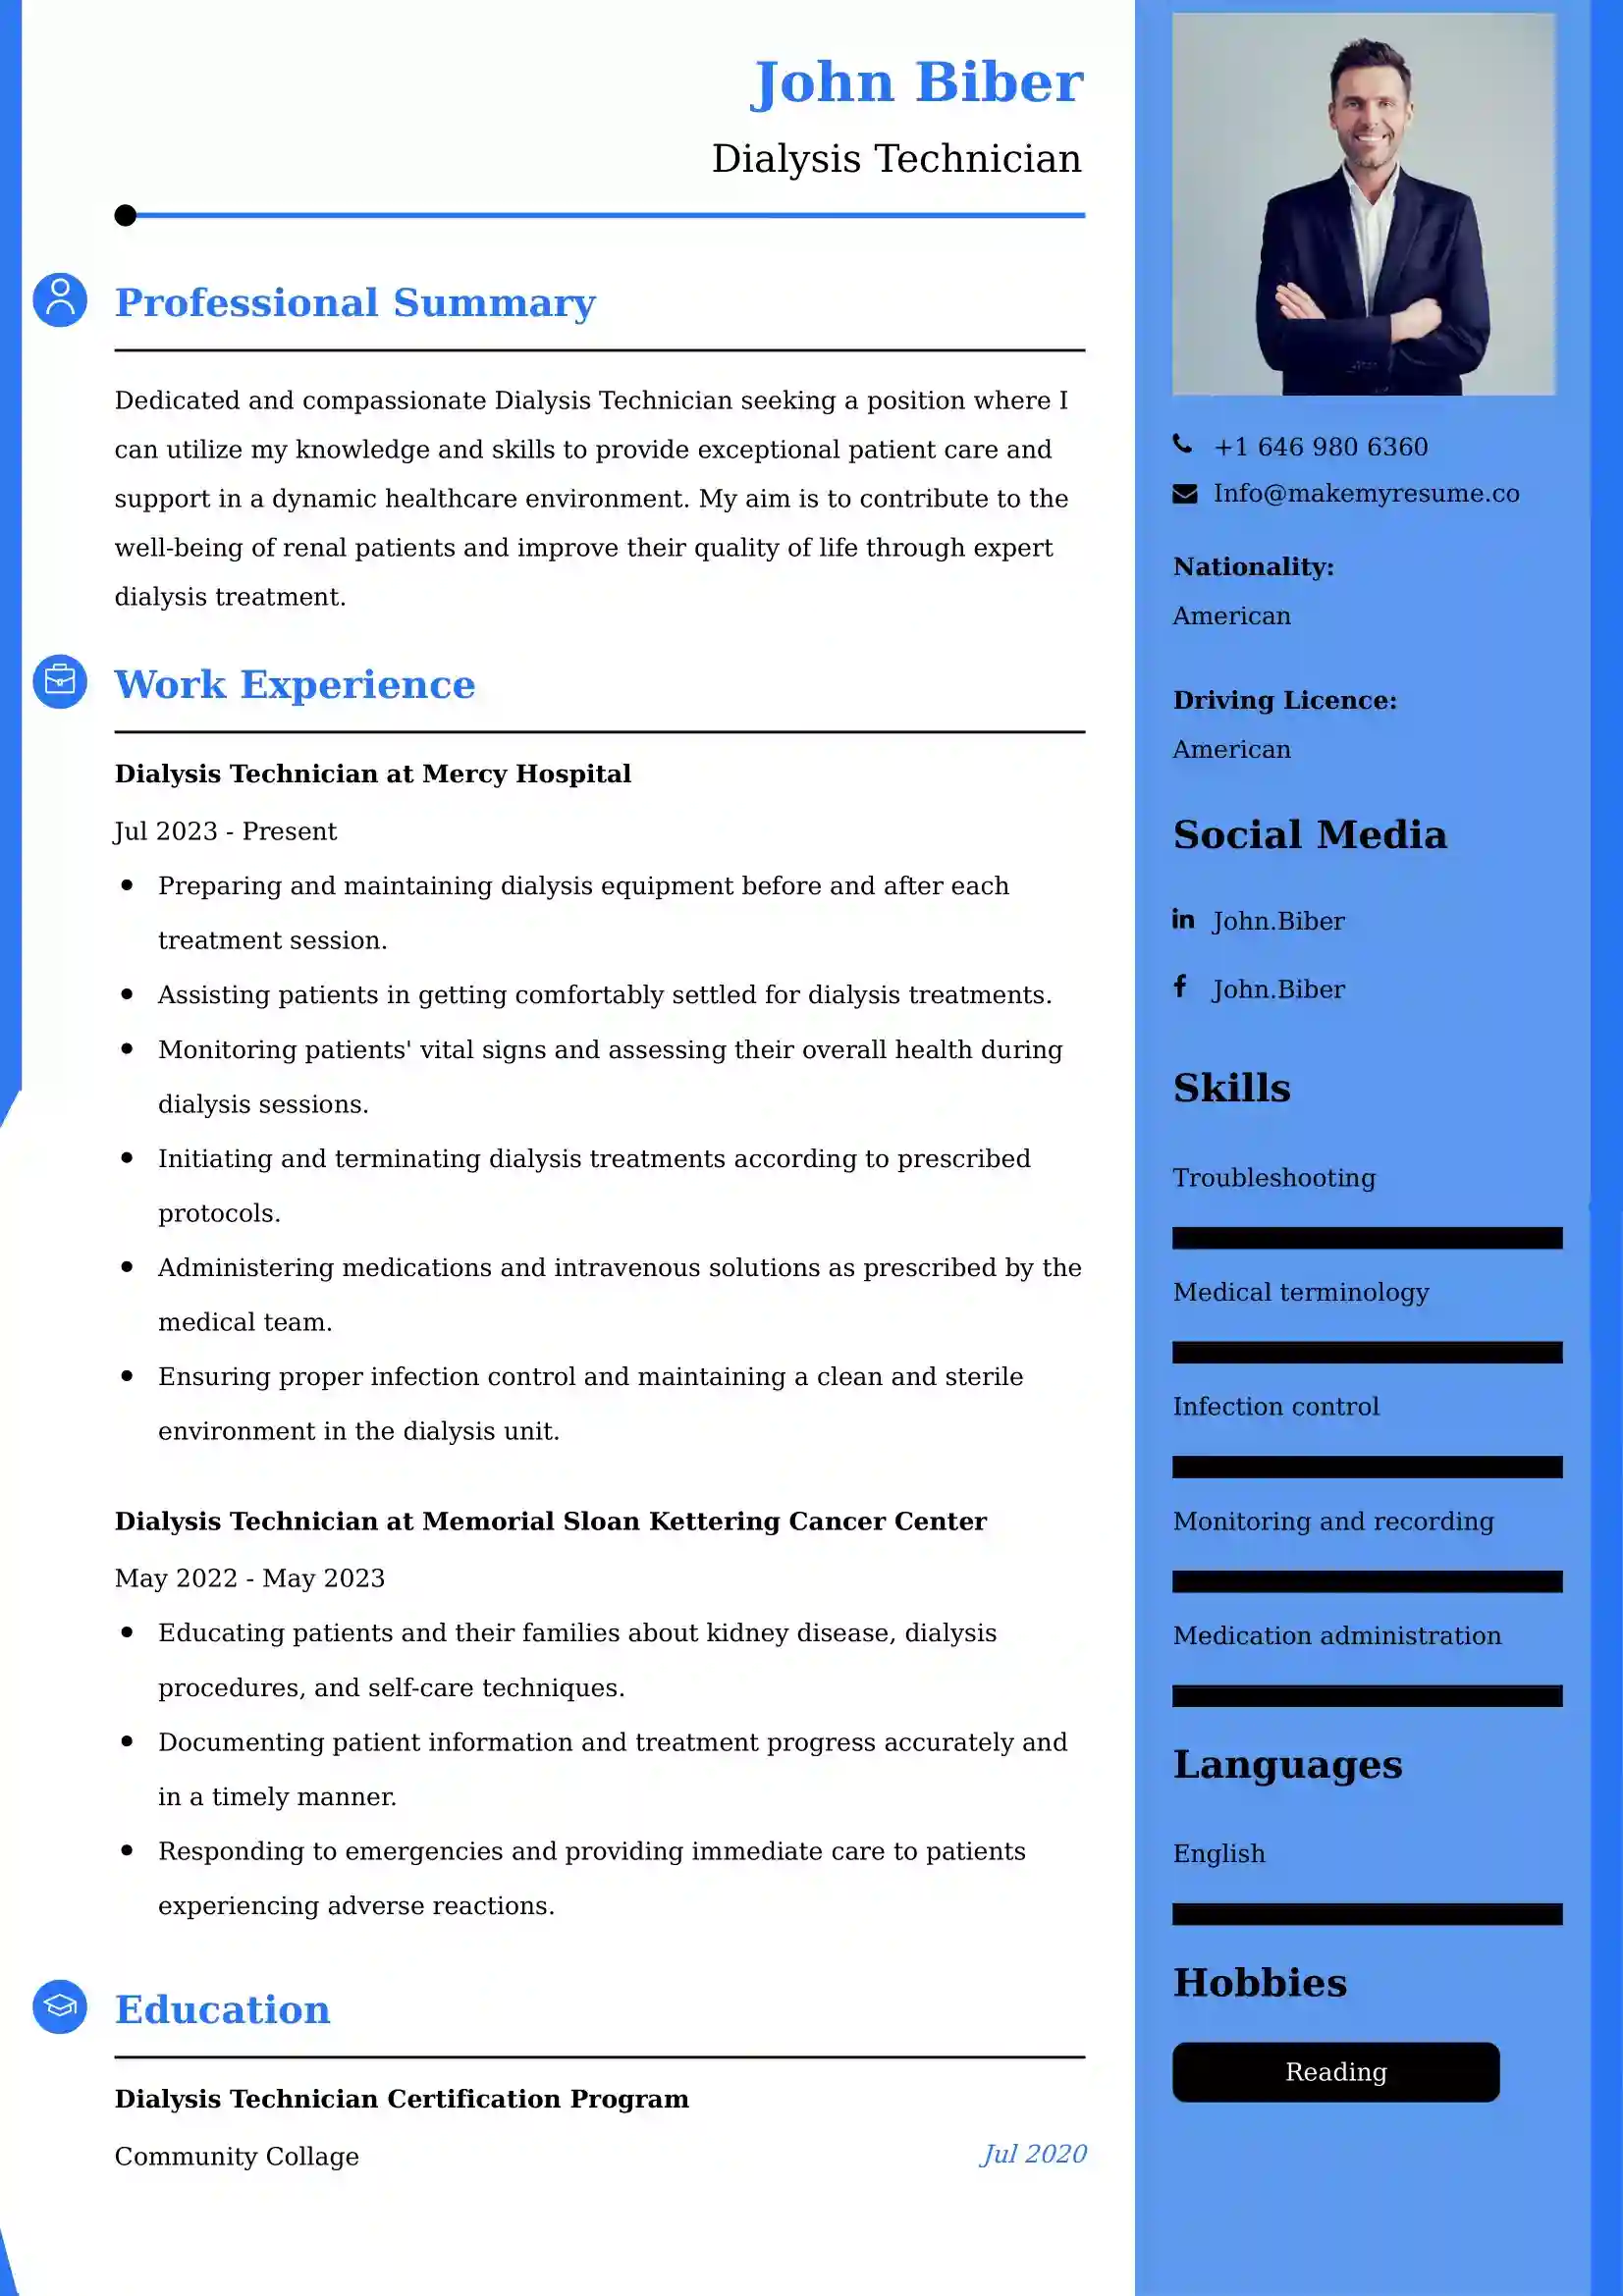 Dialysis Technician Resume Examples - UK Format, Latest Template.